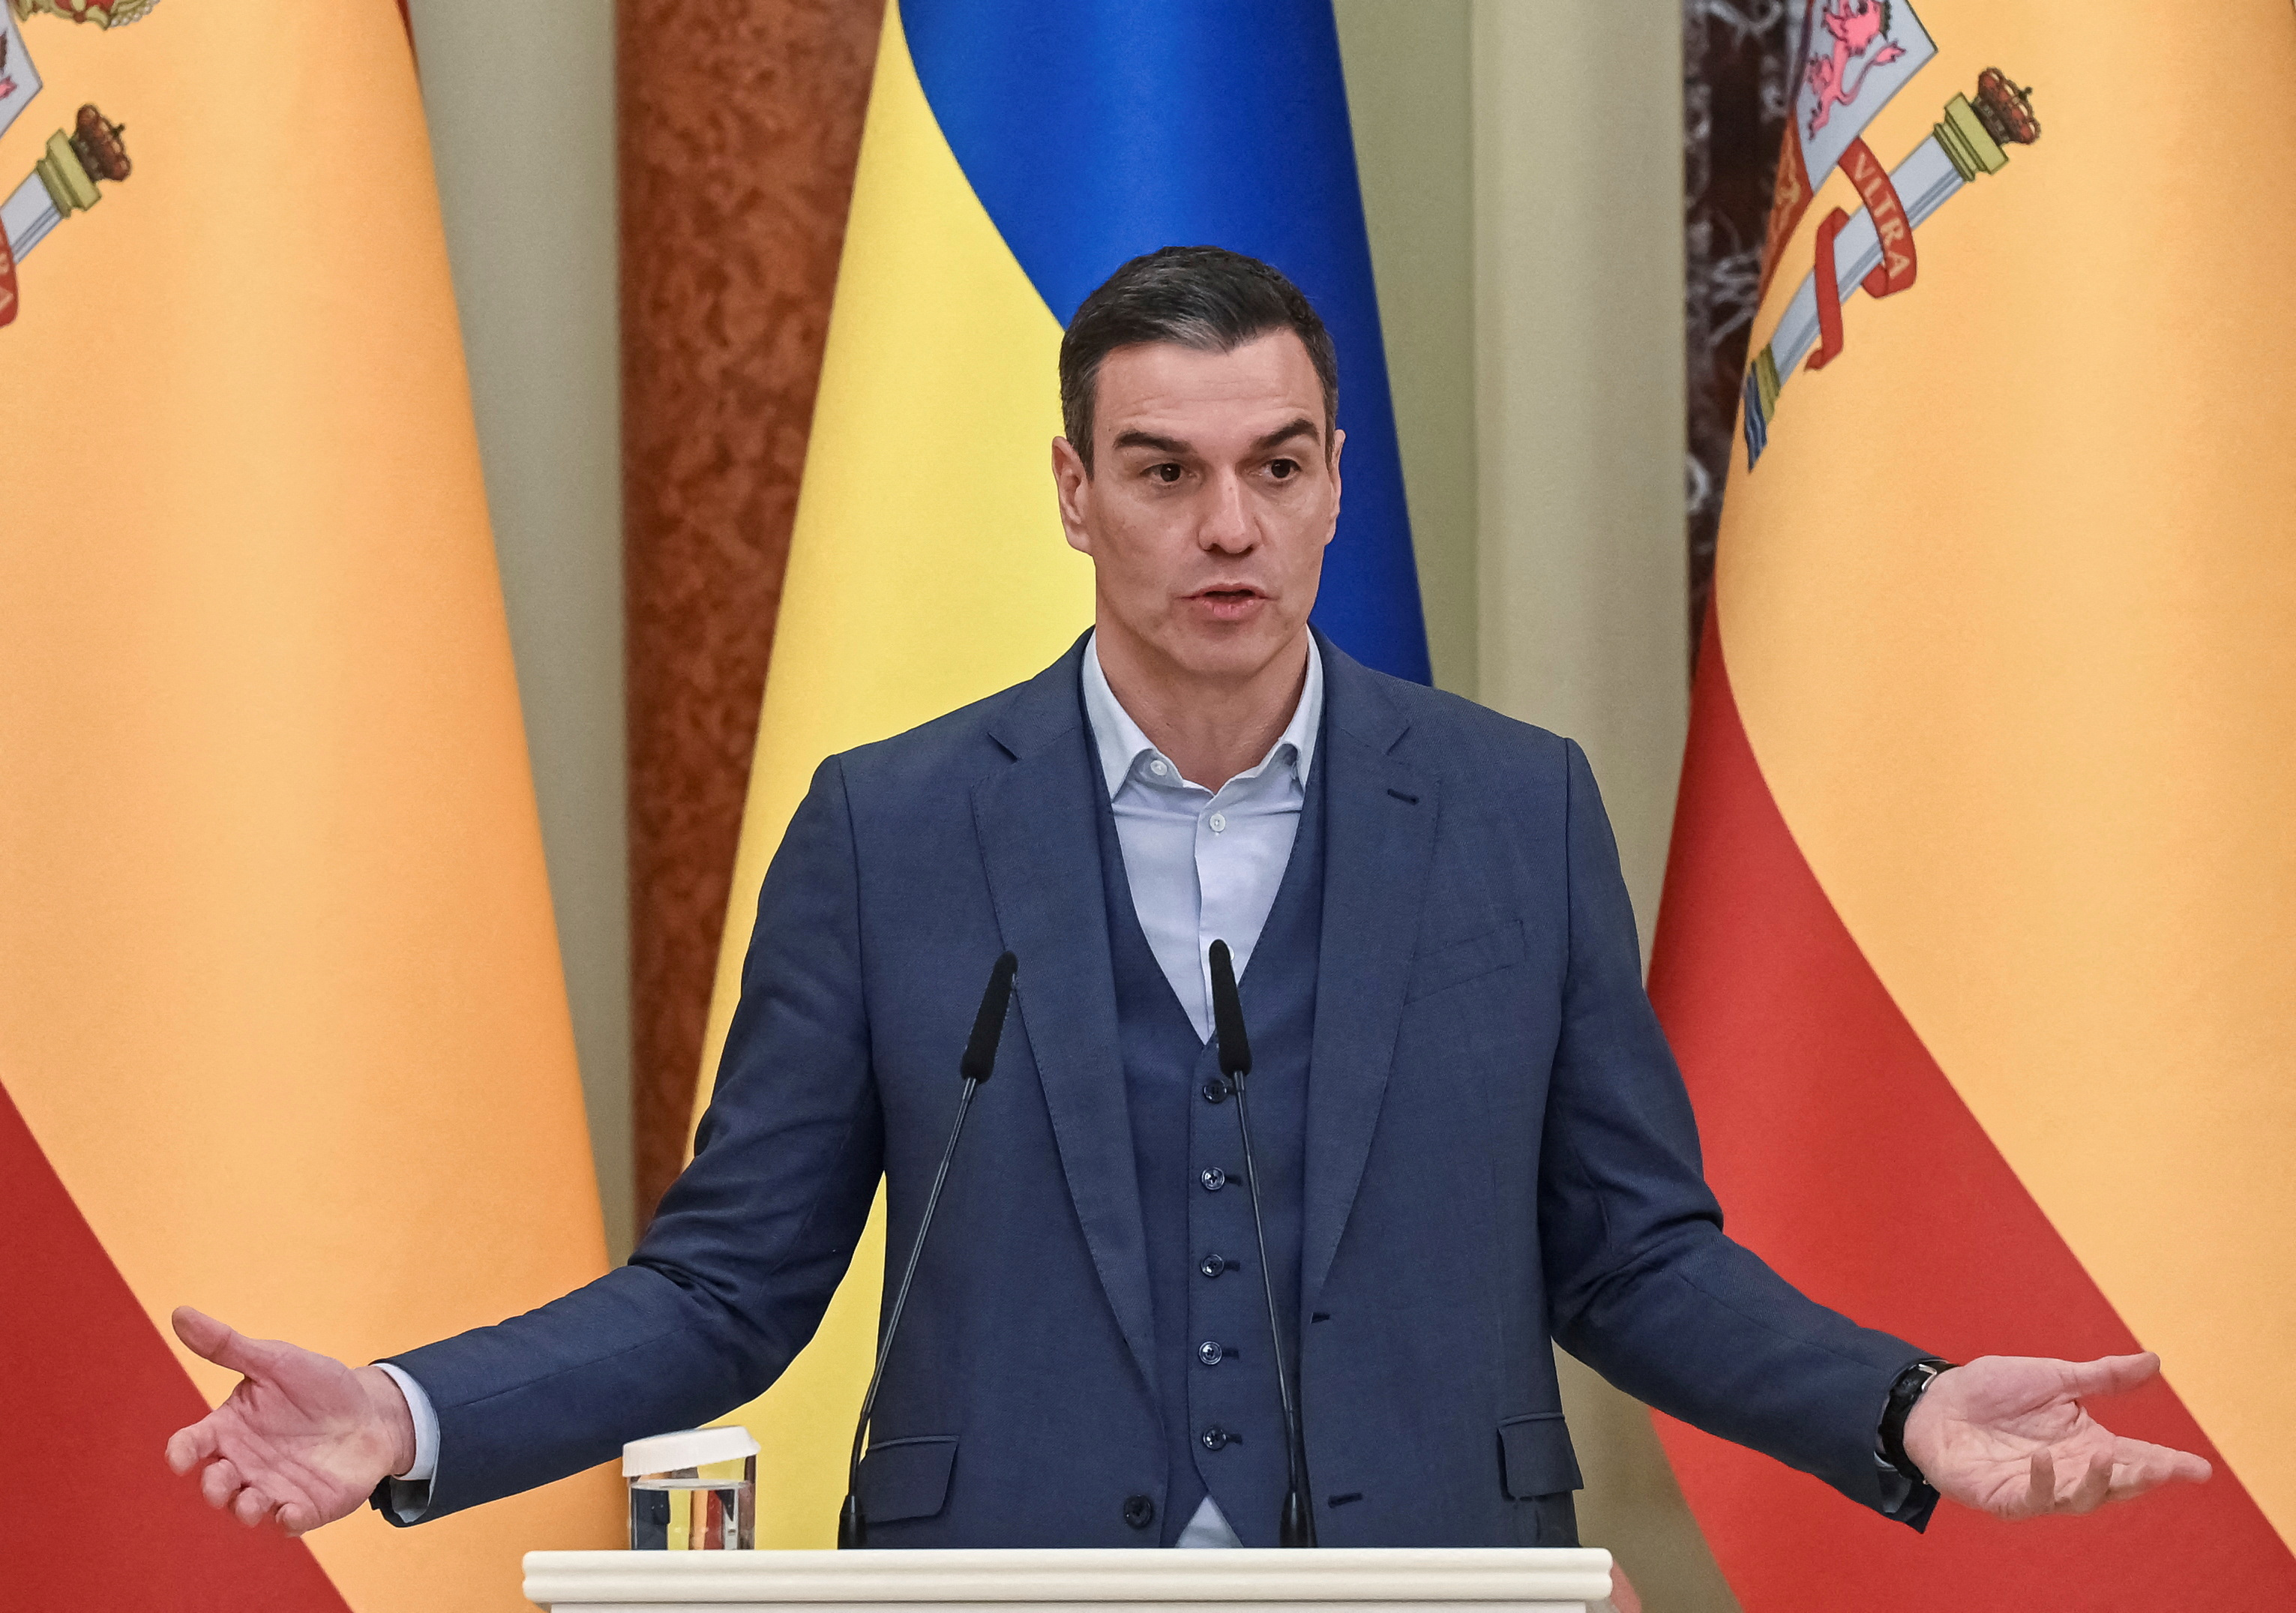 Spain's Prime Minister Pedro Sanchez attends a news briefing in Kyiv, Ukraine